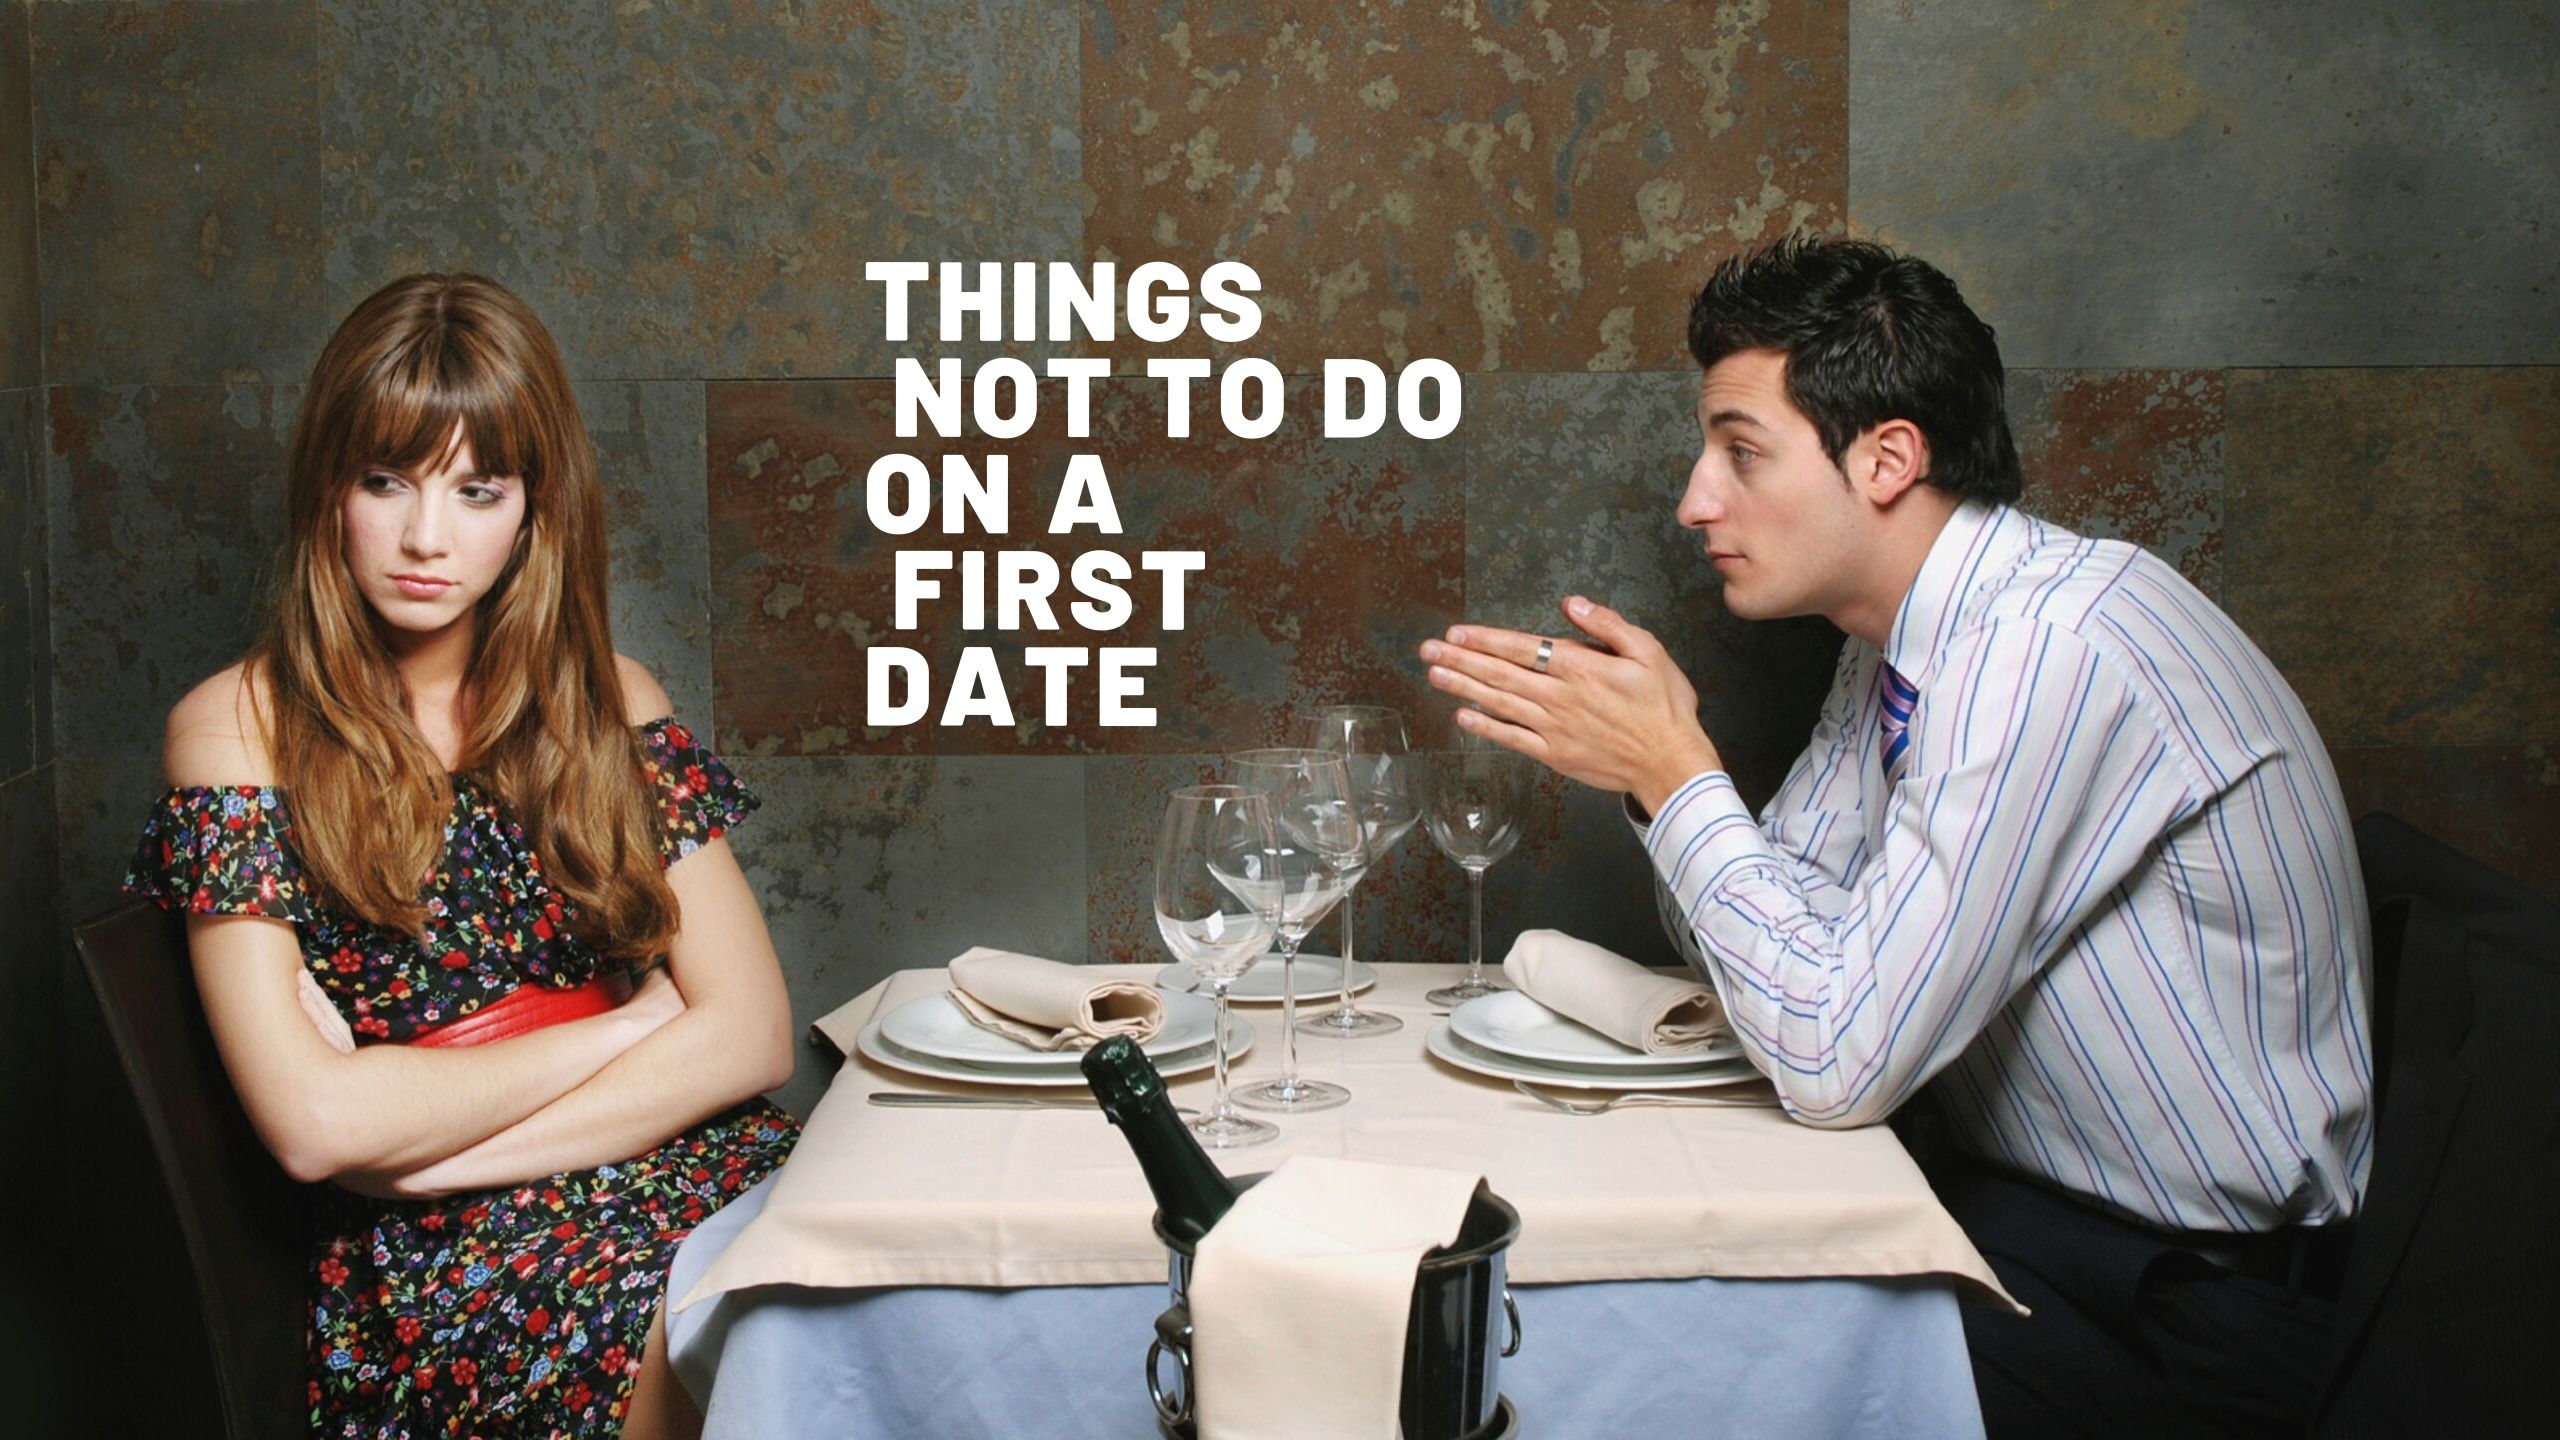 Where NOT to Go for a First Date